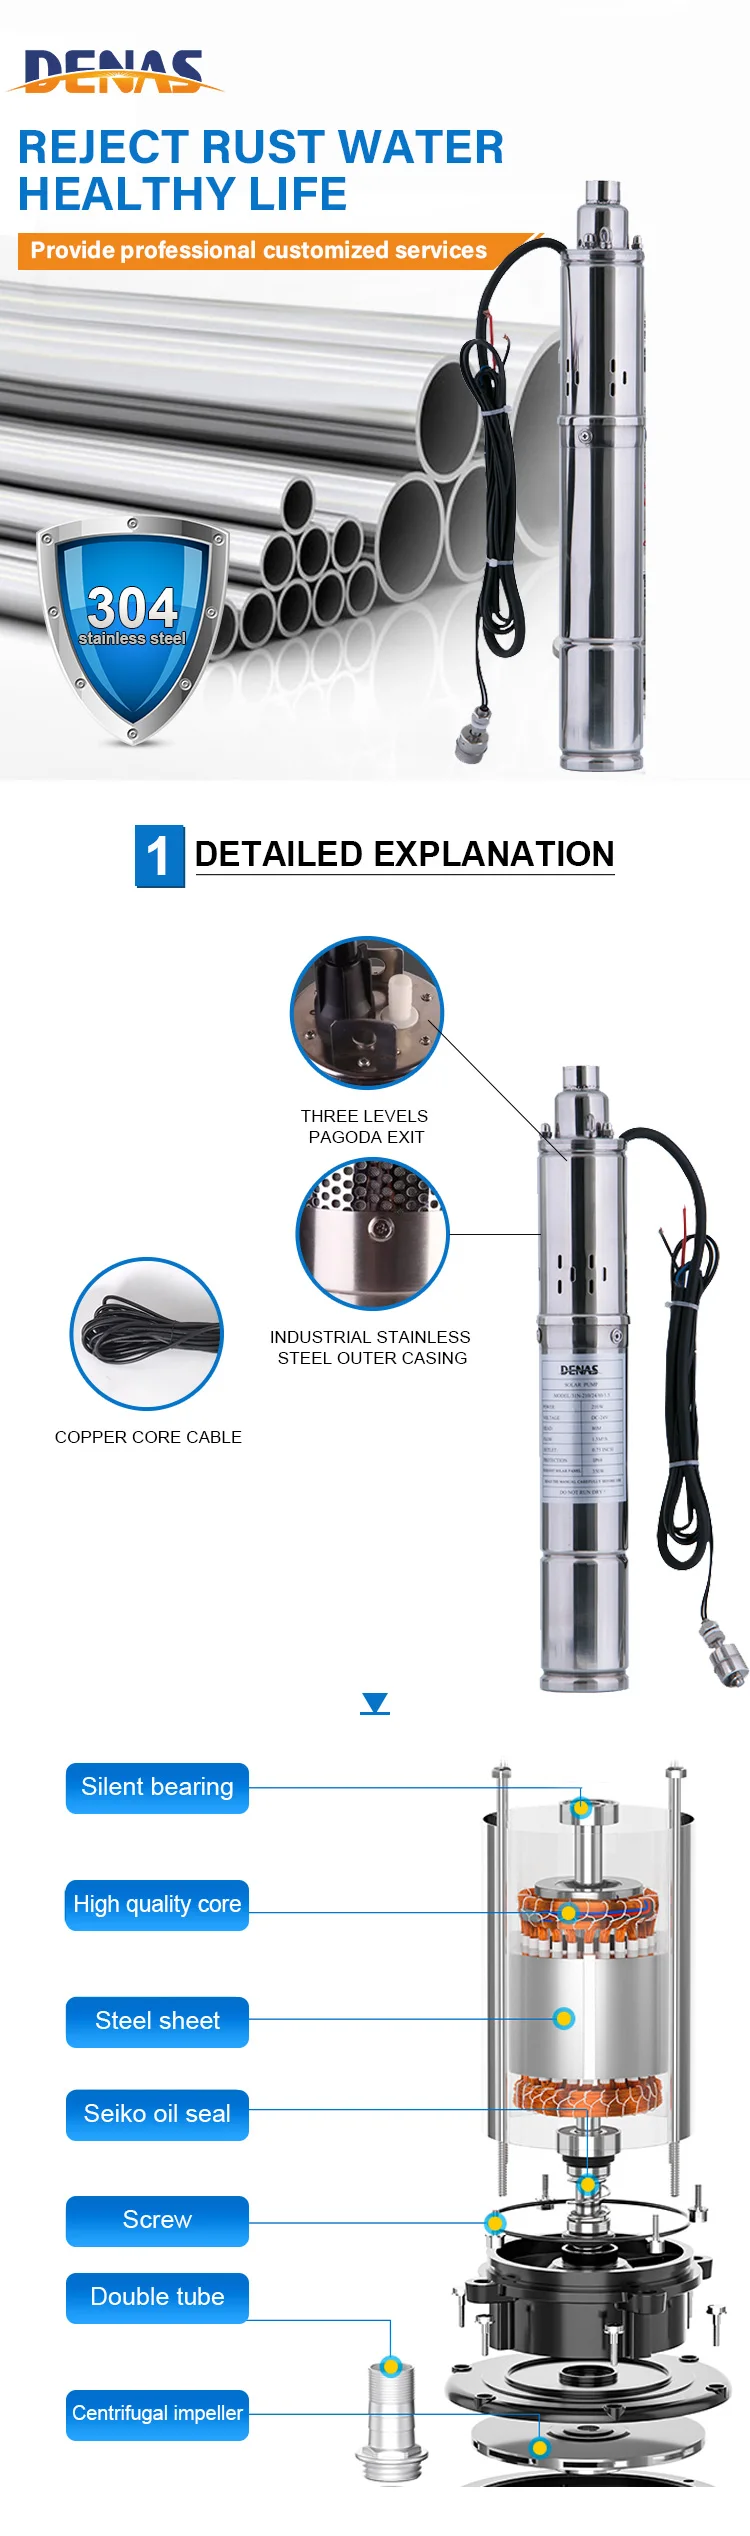 Solar Borehole Pump 2Hp Dc Submersible Solar Pump Solar Pump System For Agriculture Irrigation - Solar Water Pumb - 1